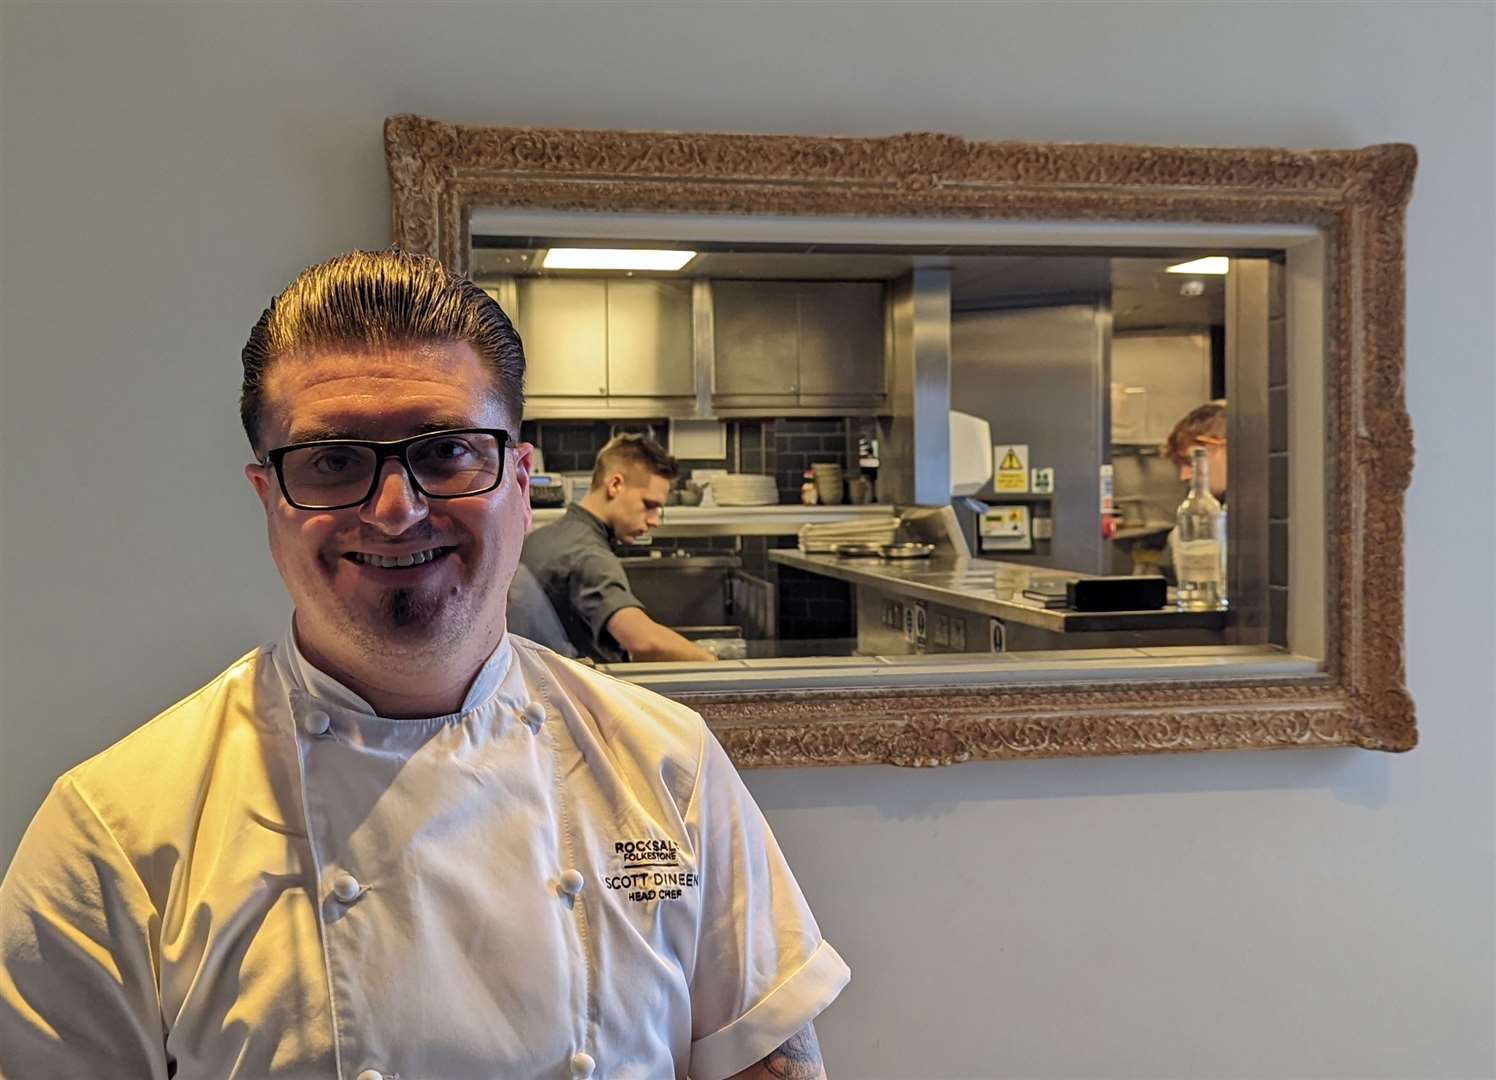 Scott Dineen wants to use his kitchen to develop the talents of young people living locally